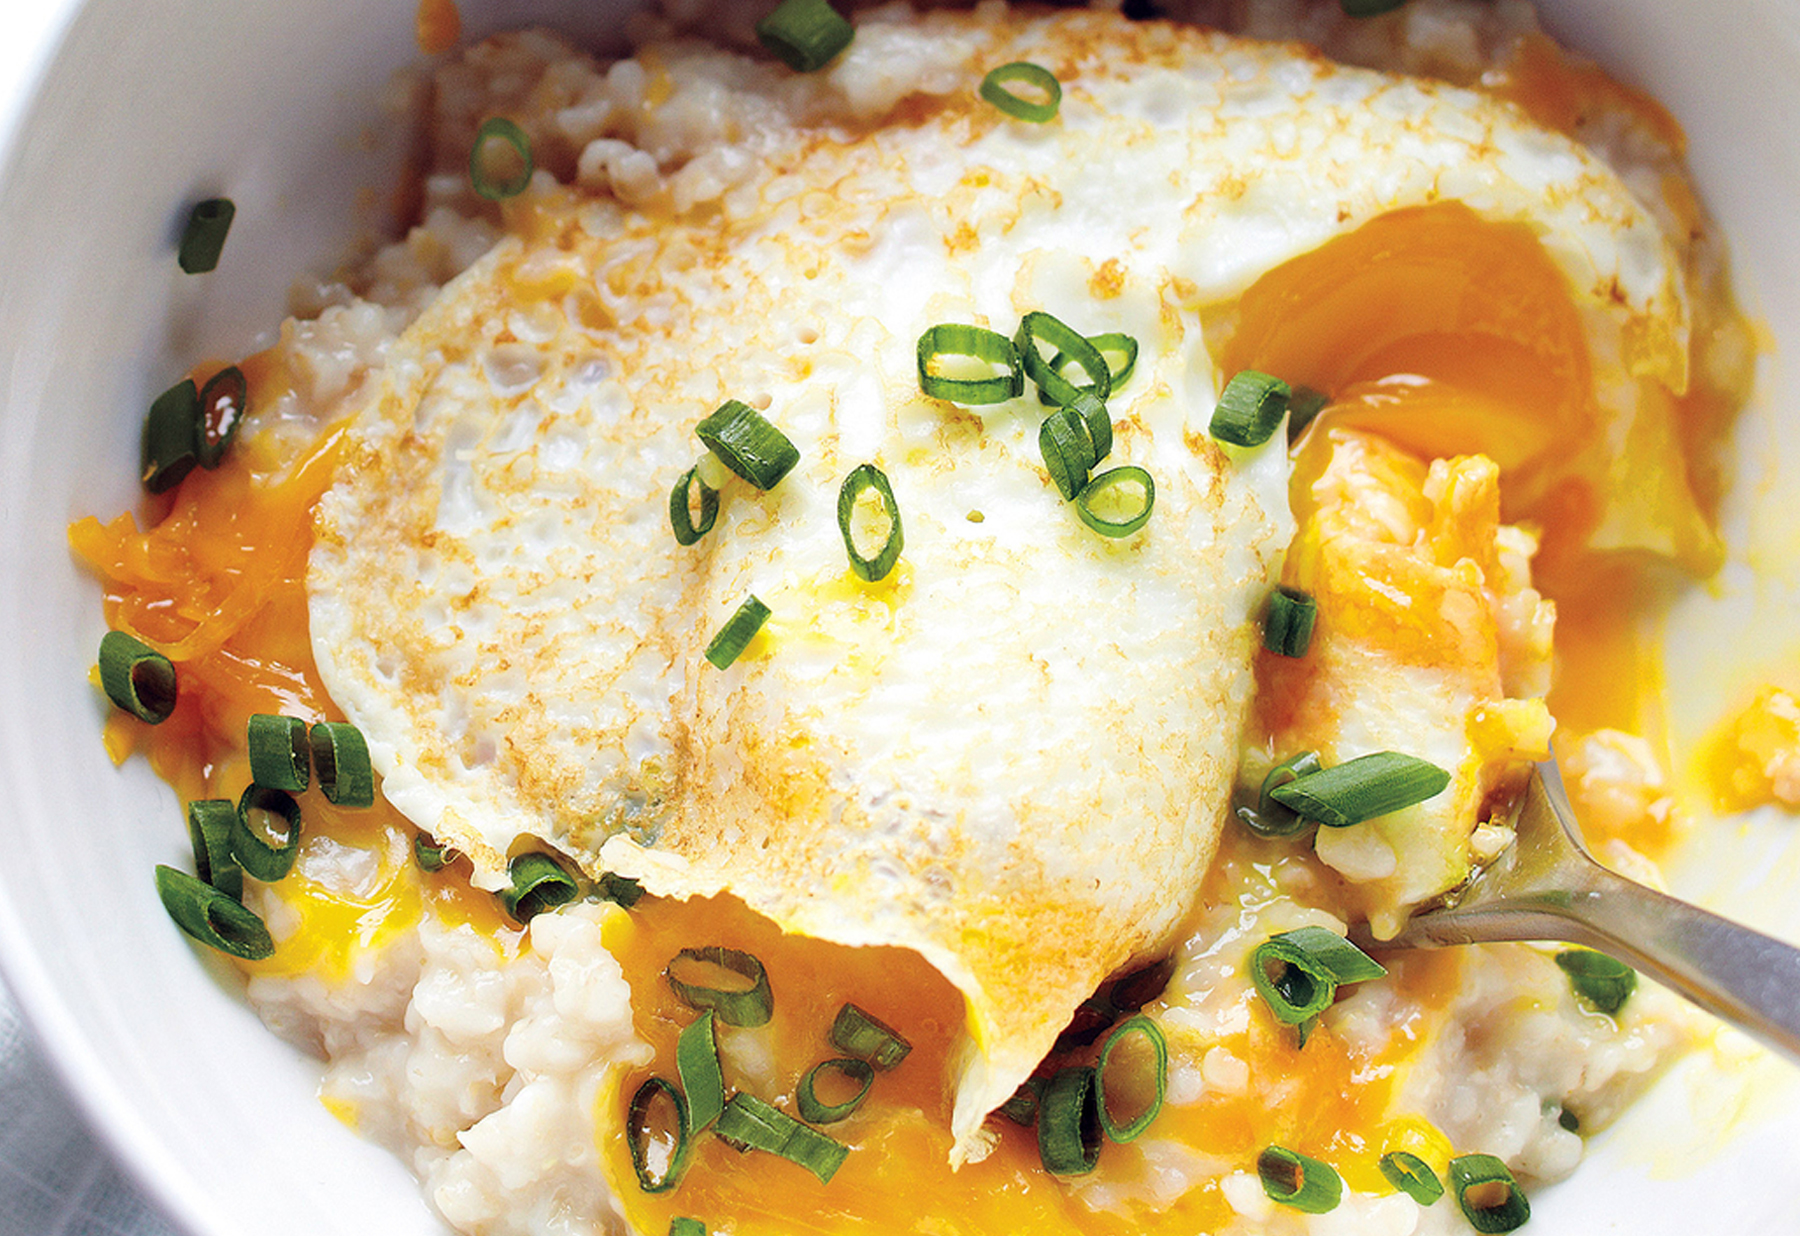 healthy breakfast ideas: 34 simple meals for busy mornings | greatist